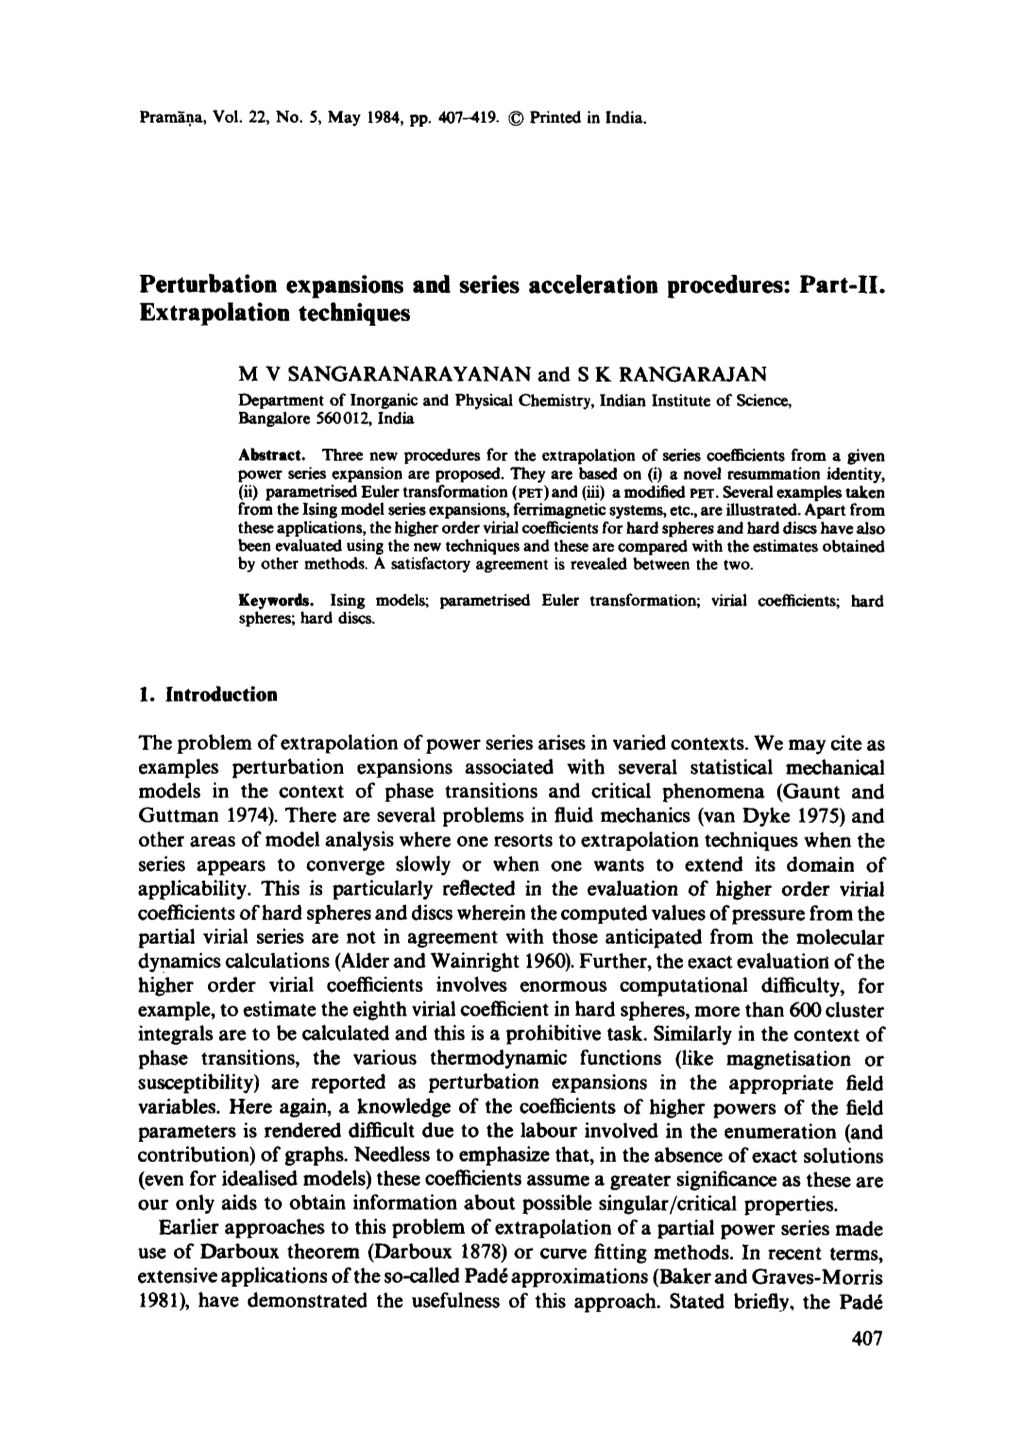 Perturbation Expansions and Series Acceleration Procedures: Part-II